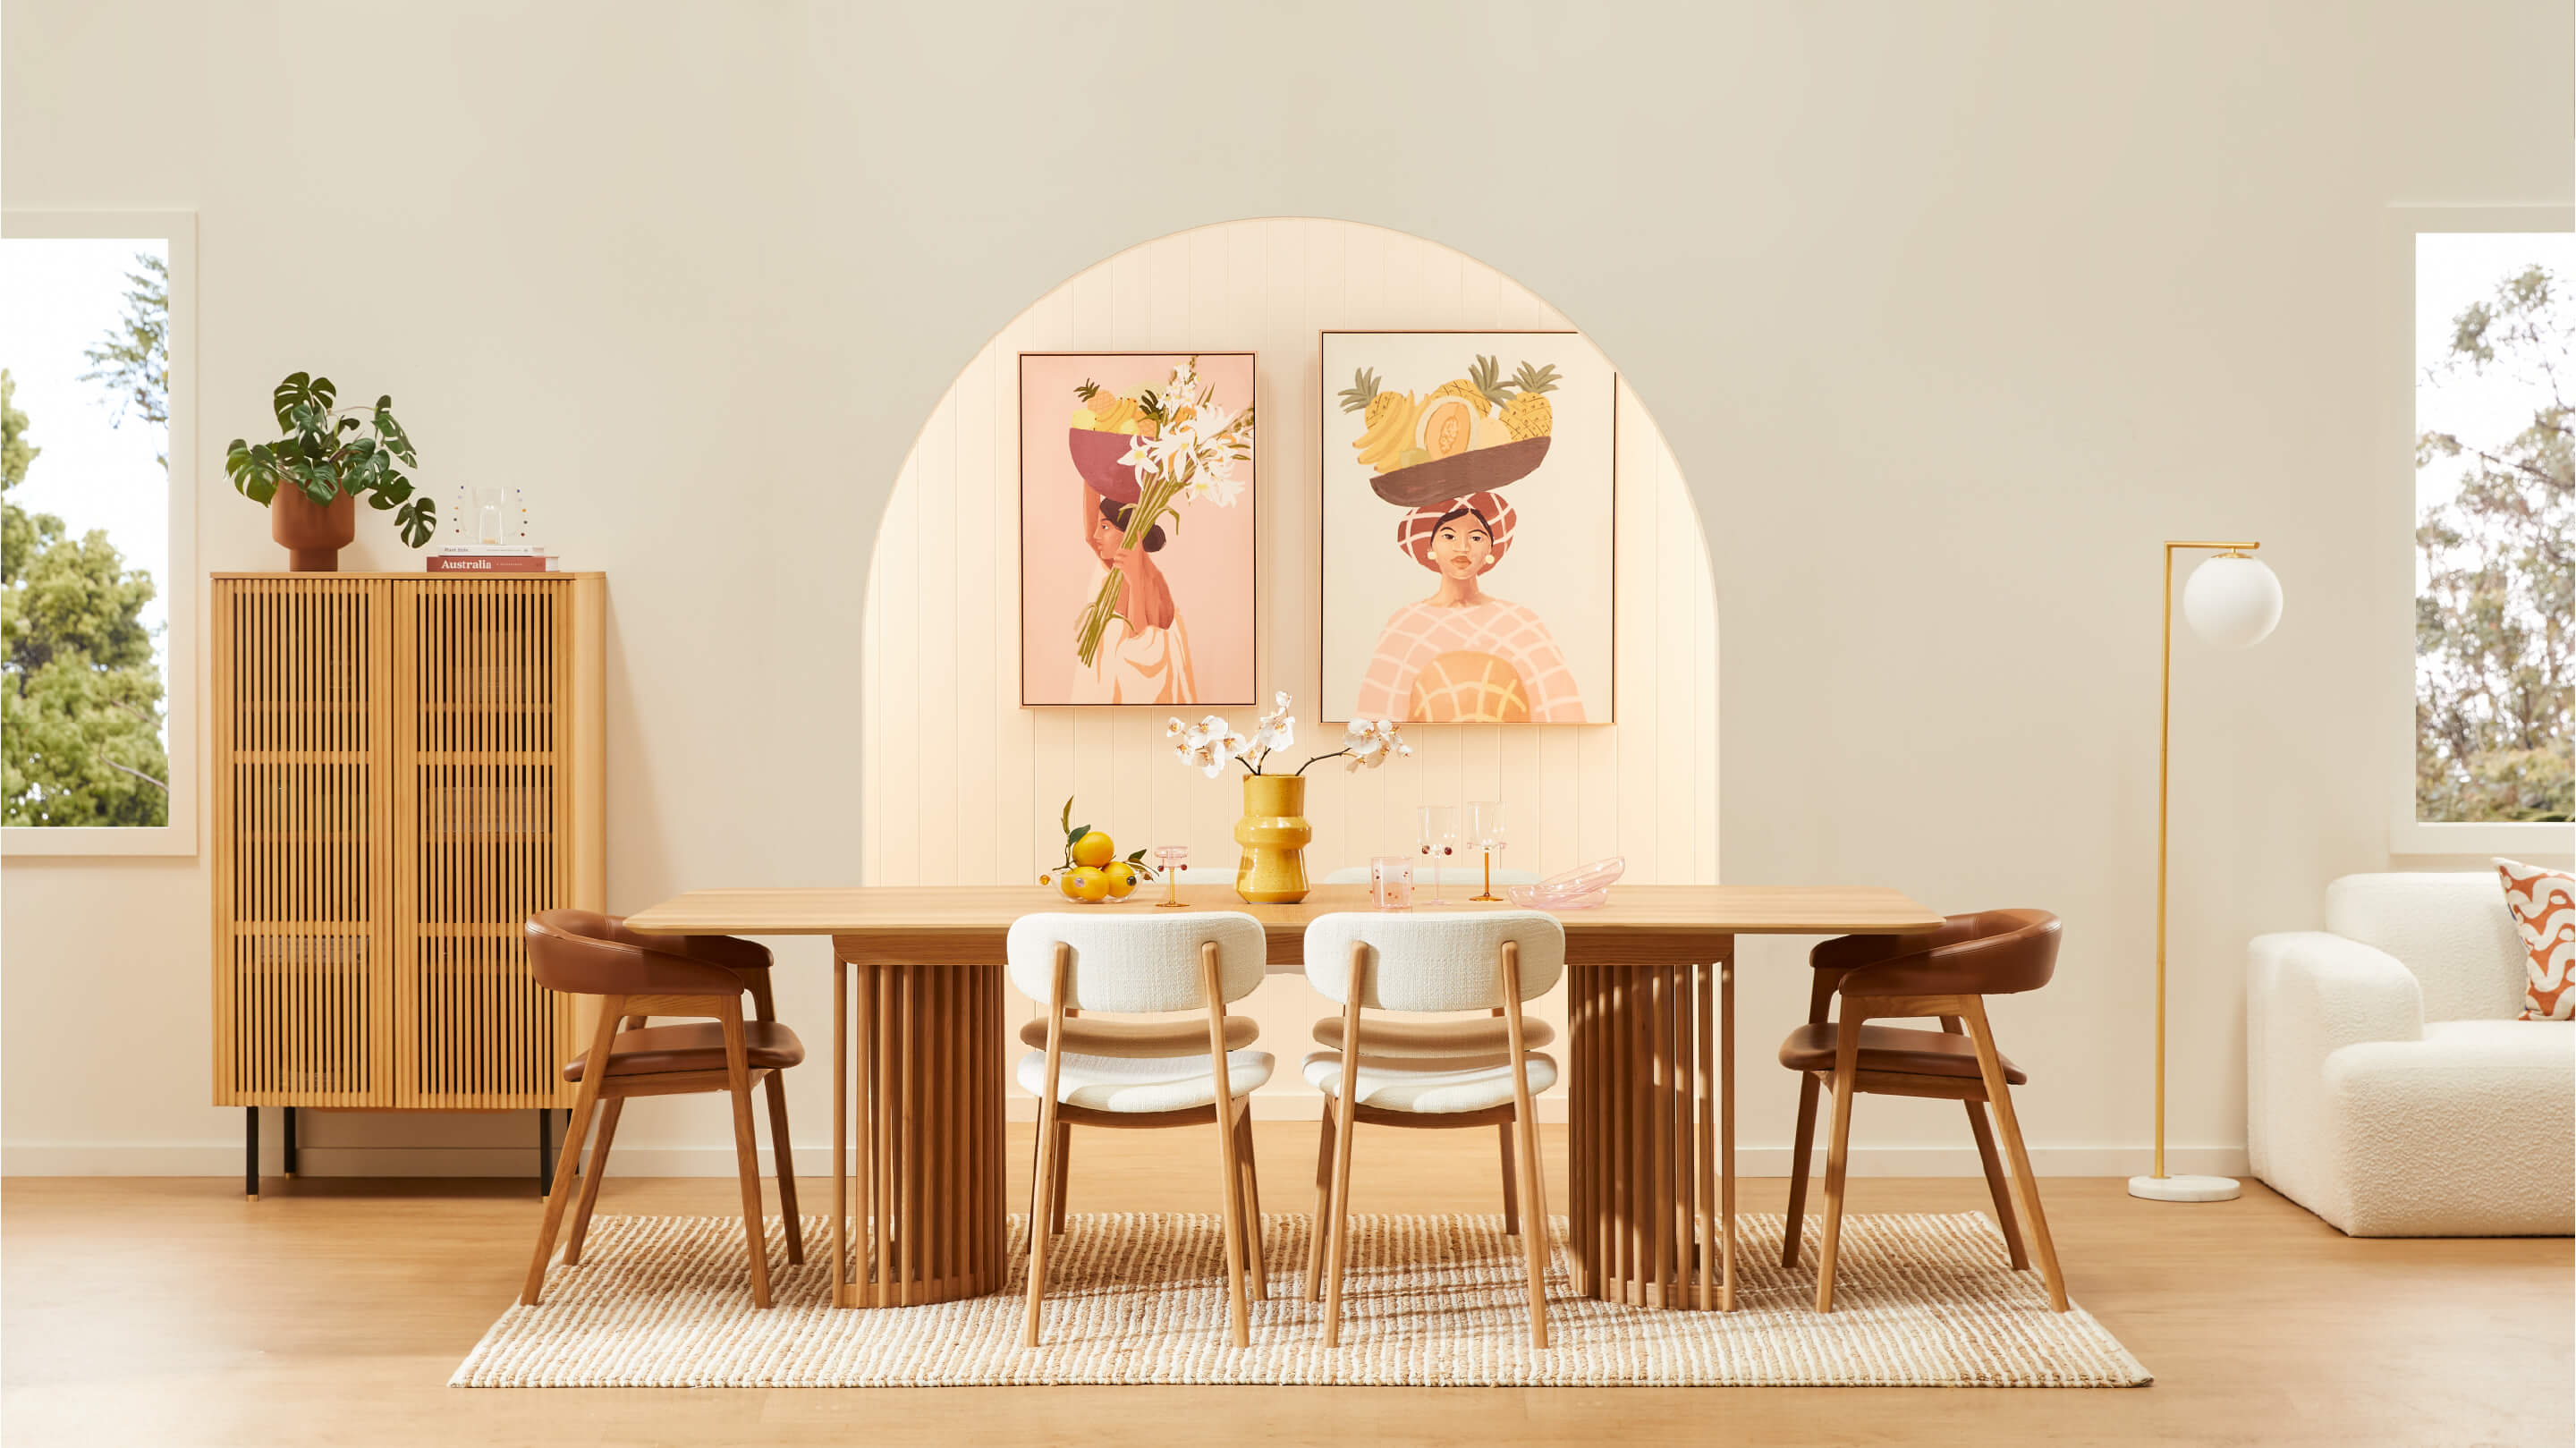 Introducing our Capsule Spring/ Summer 22 collection, the Casablanca Dining space is fresh and contemporary, full of stunning dining chairs, extendable dining tables and home decor. Shop the collection online or in-store now!